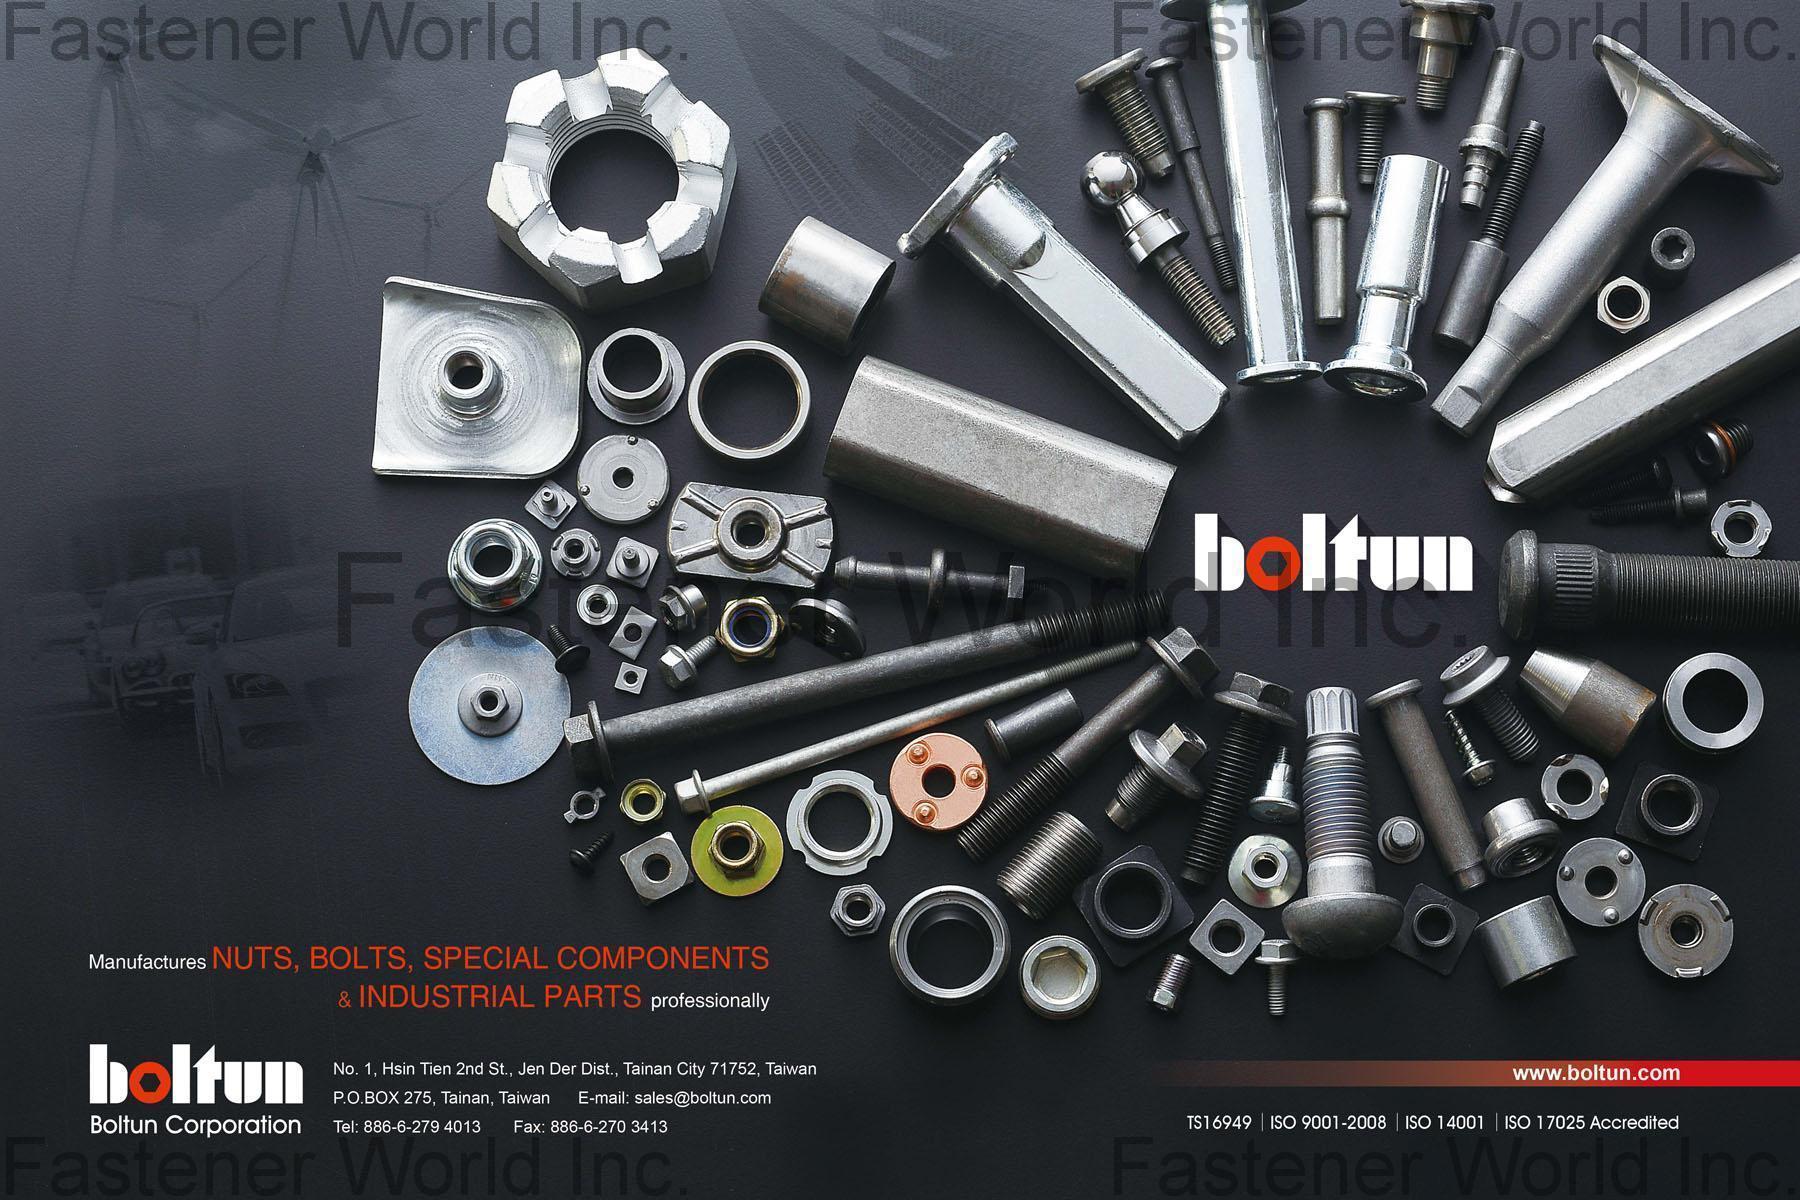 BOLTUN CORPORATION  , Welding Nuts,Rivet Nuts,Clinch Nuts,Locking Nuts,Nylon Insert Nuts,Conical Washer Nuts,T-Nuts,CNC Machining Parts,Stamping Parts,Bushed & Sleeves,Assembly Components,Special Parts,HEX. Bolt & Screw,Flange Bolt,Socket,Sems,Screw With Welding Projection,Screw With Welding Ring & Points,Clinch Bolt,T C Bolt,Special Pin,Wheel Bolt,Rail Bolt,Rail Bolts Construction Fasteners: Nuts, Screws & Washers,Wind Turbine Fasteners Kits: Nuts, Bolts & Washers Truck Wheel Bolts,Bolts & Nuts & Components,Motorcycle parts,Nylon rings & special washer,Expansion Bolt , Special Parts